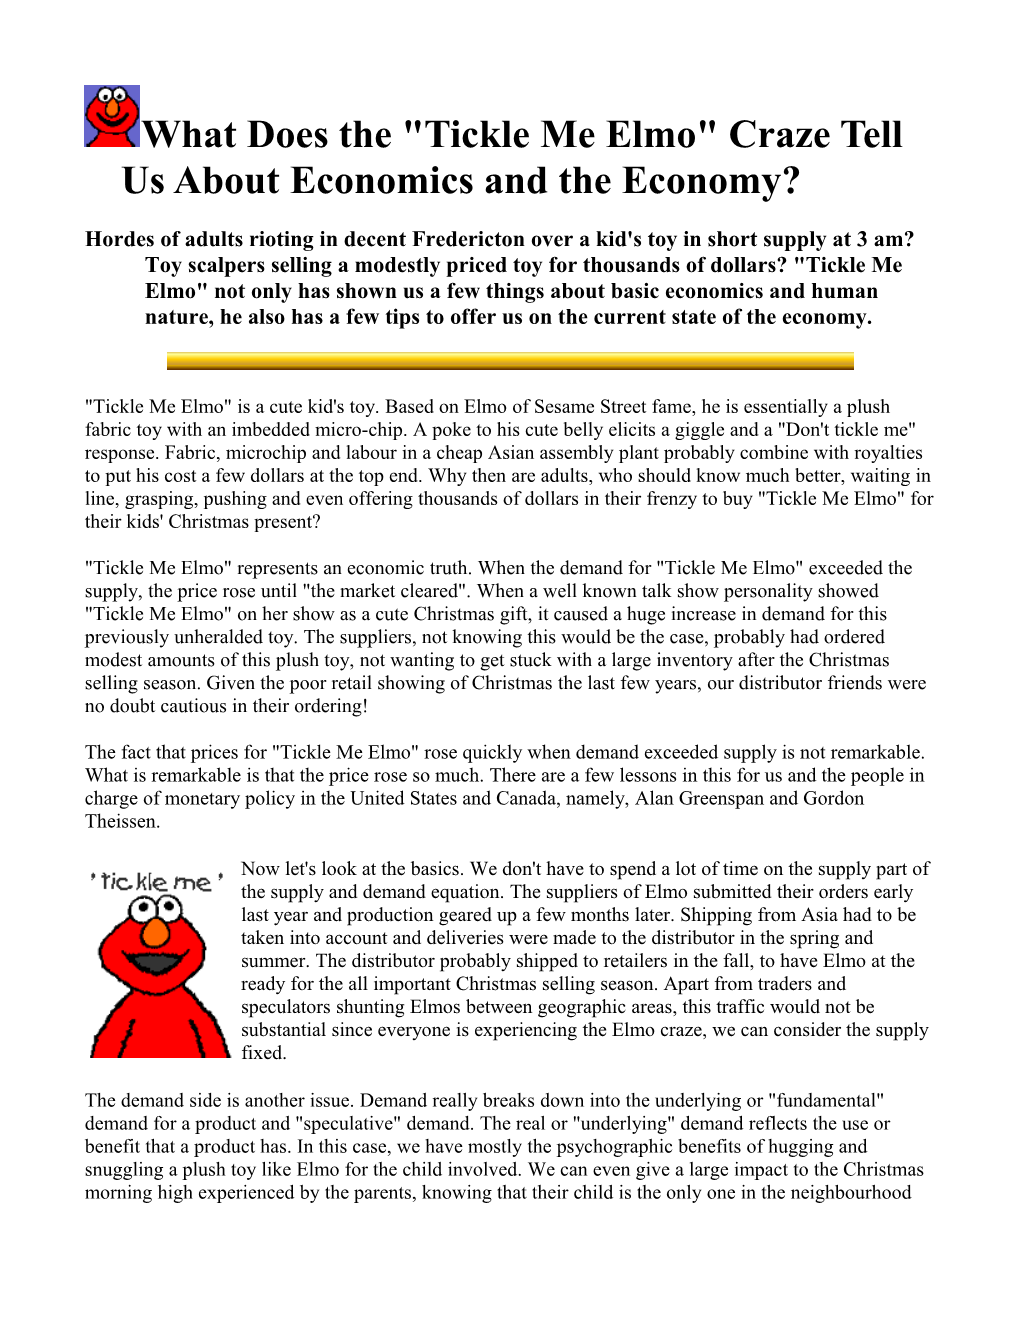 What Does the Tickle Me Elmo Craze Tell Us About Economics and the Economy